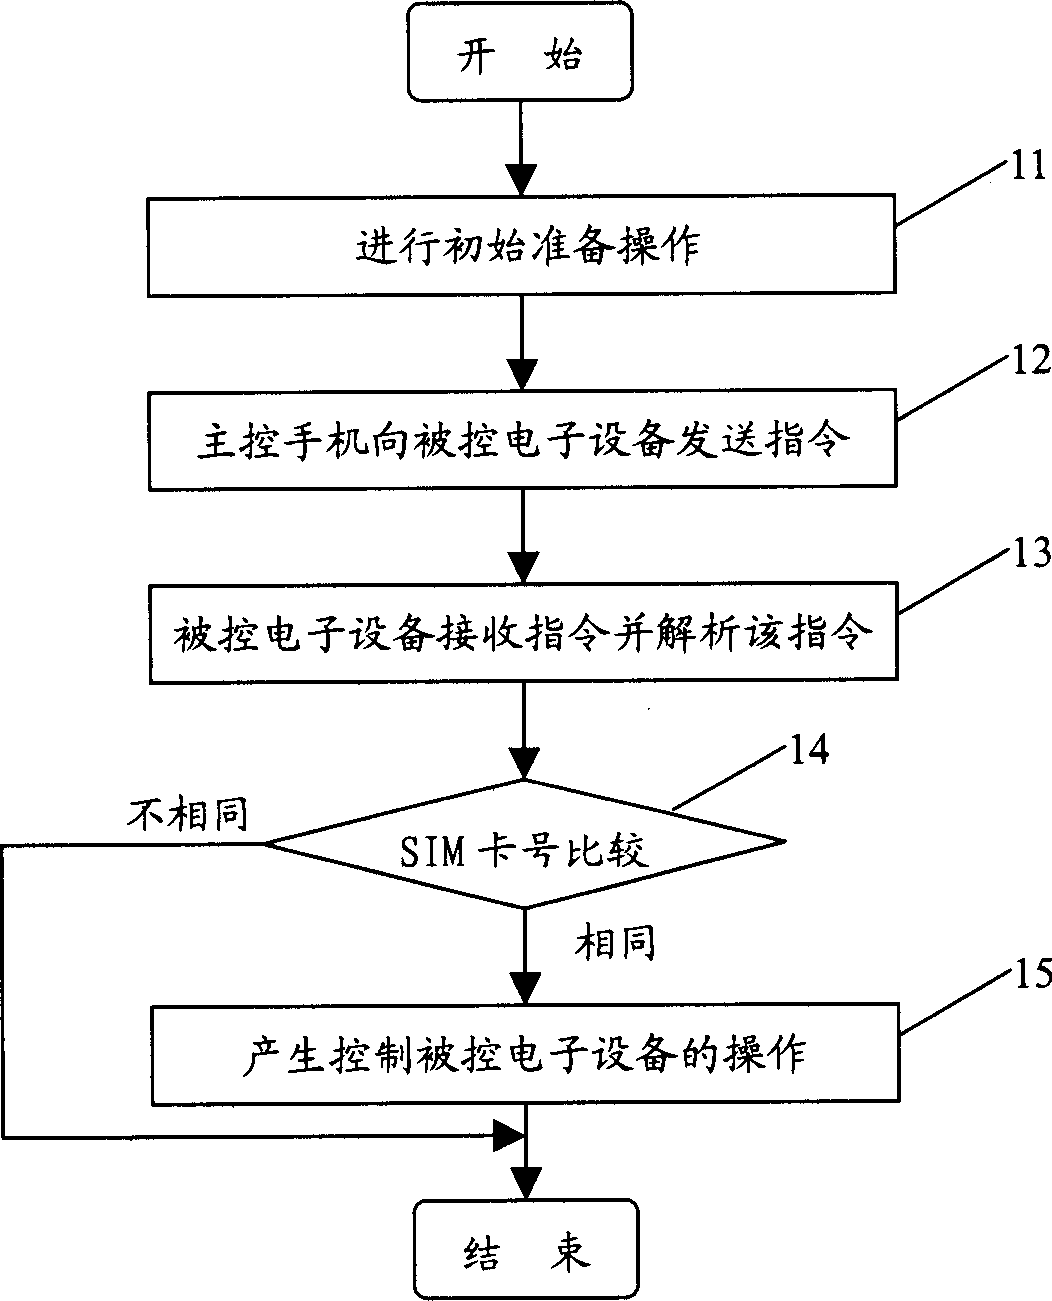 Method and system for operating and controlling electronic apparatus